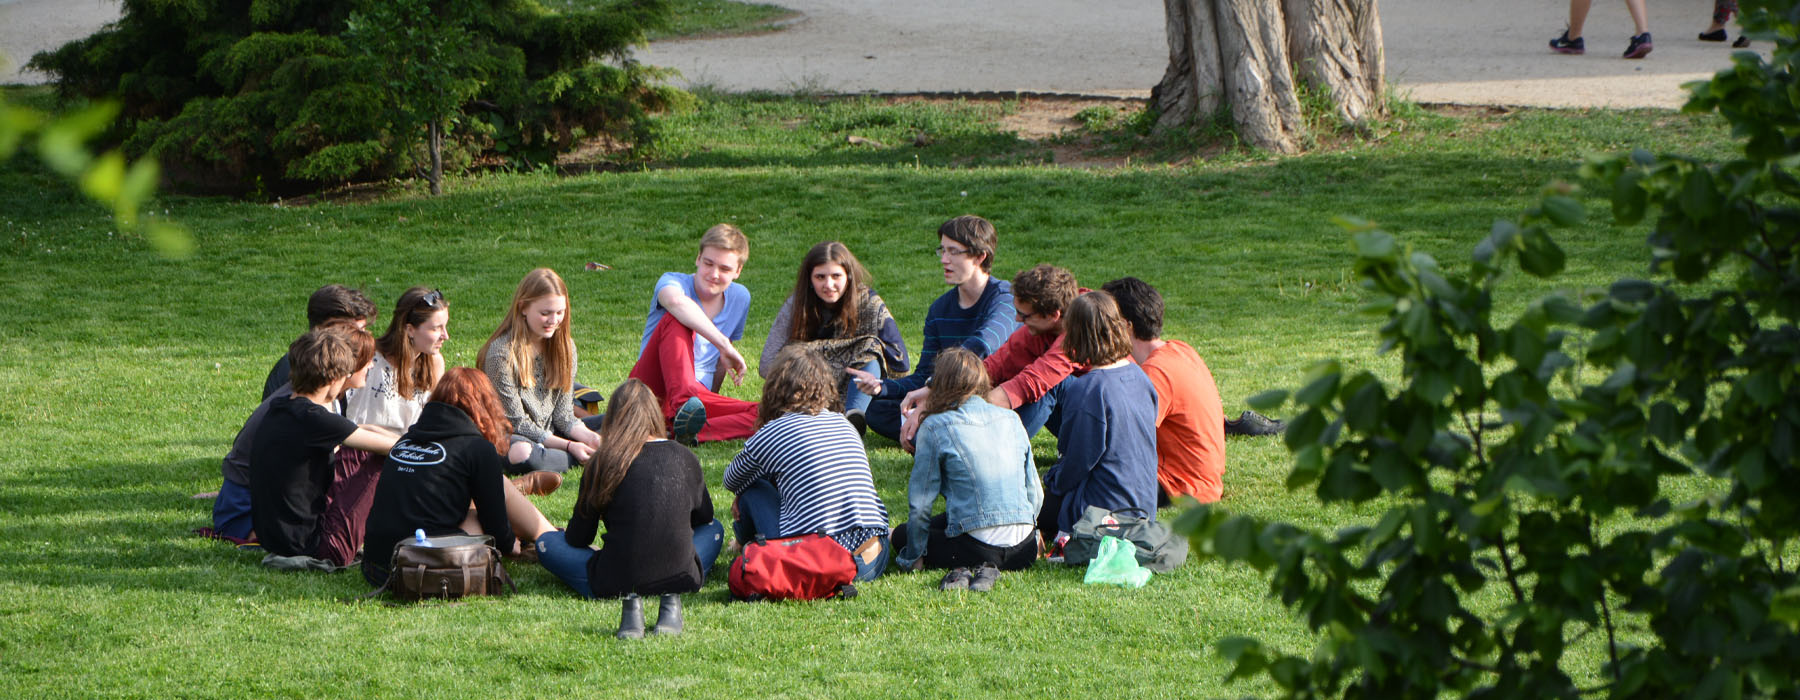 Group of young people sitting in a circle in a park